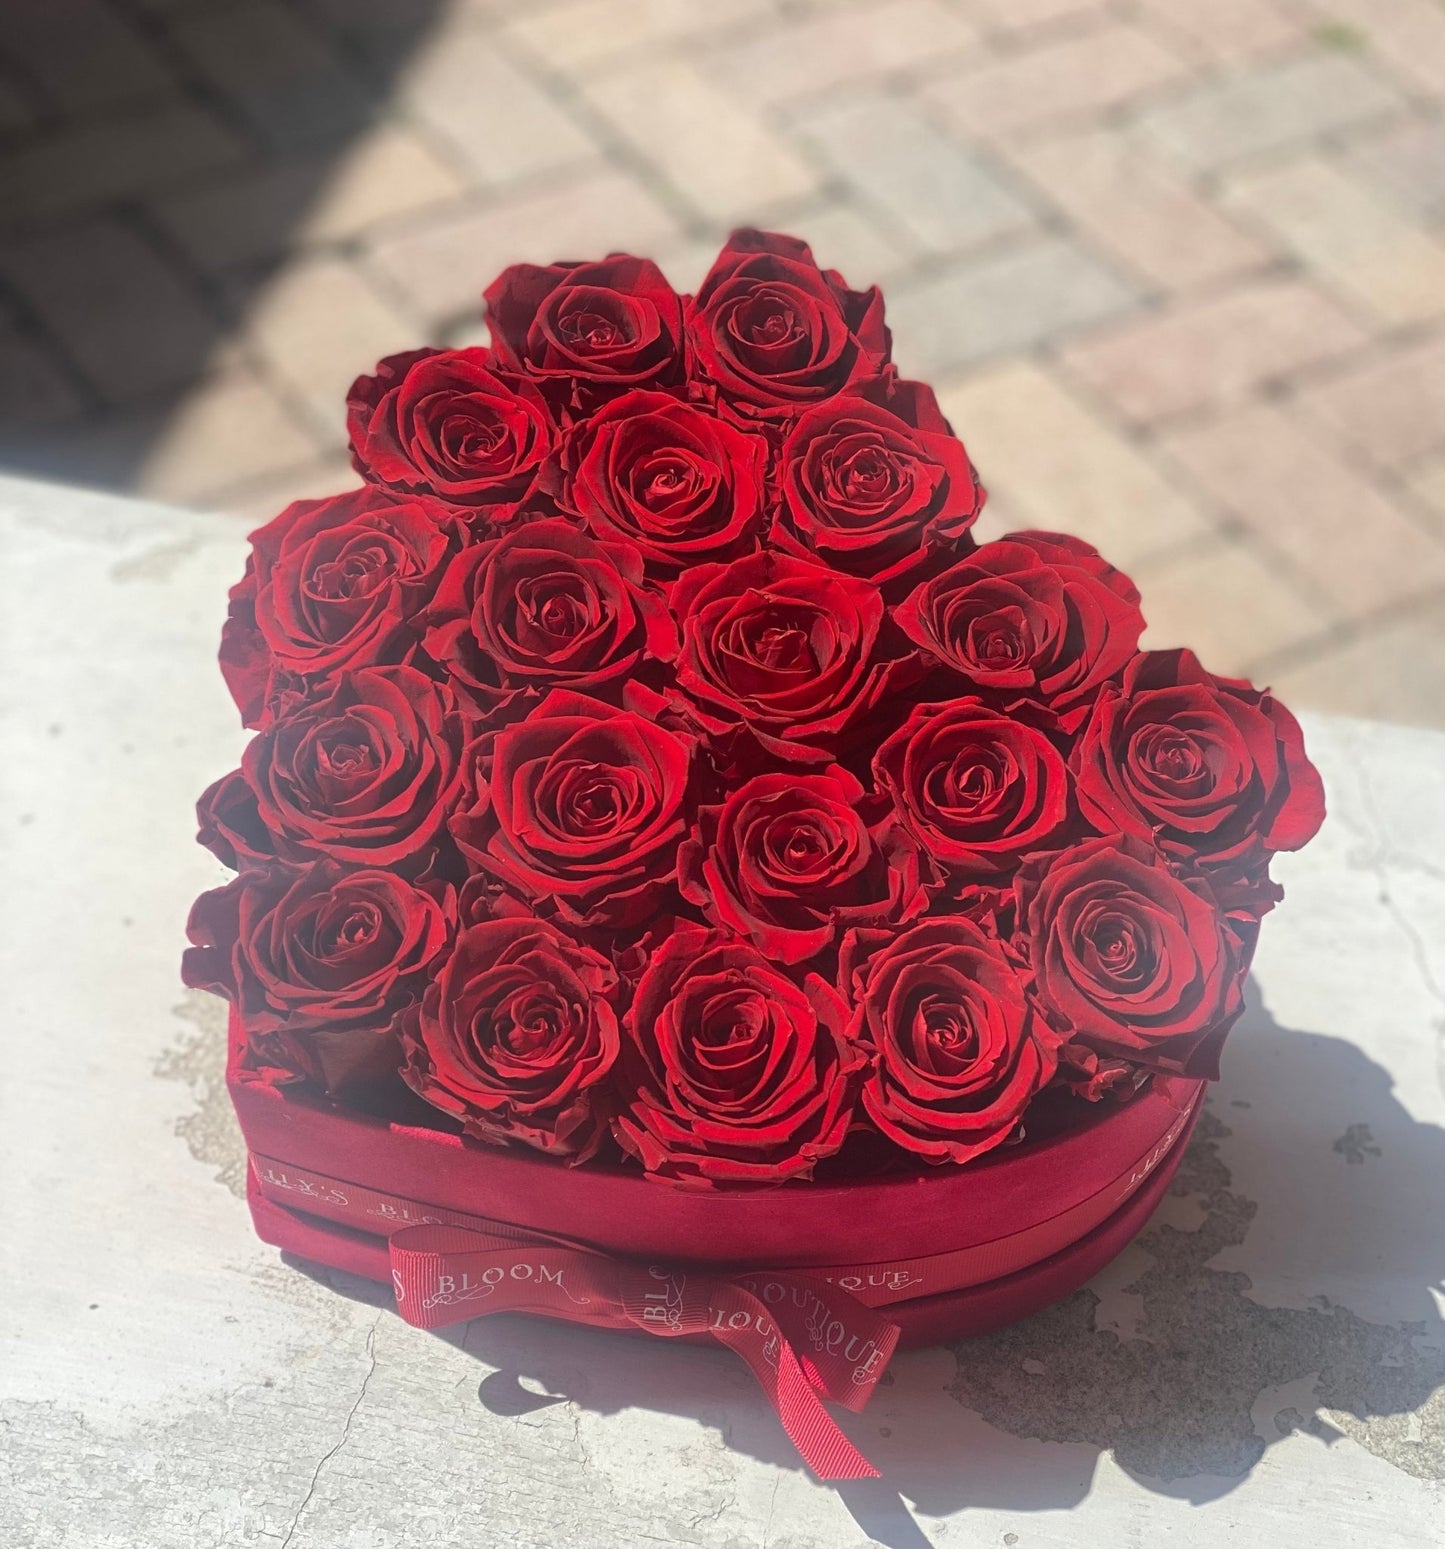 Red Roses Preserved Medium Heart Box - Lily's Bloom Boutique